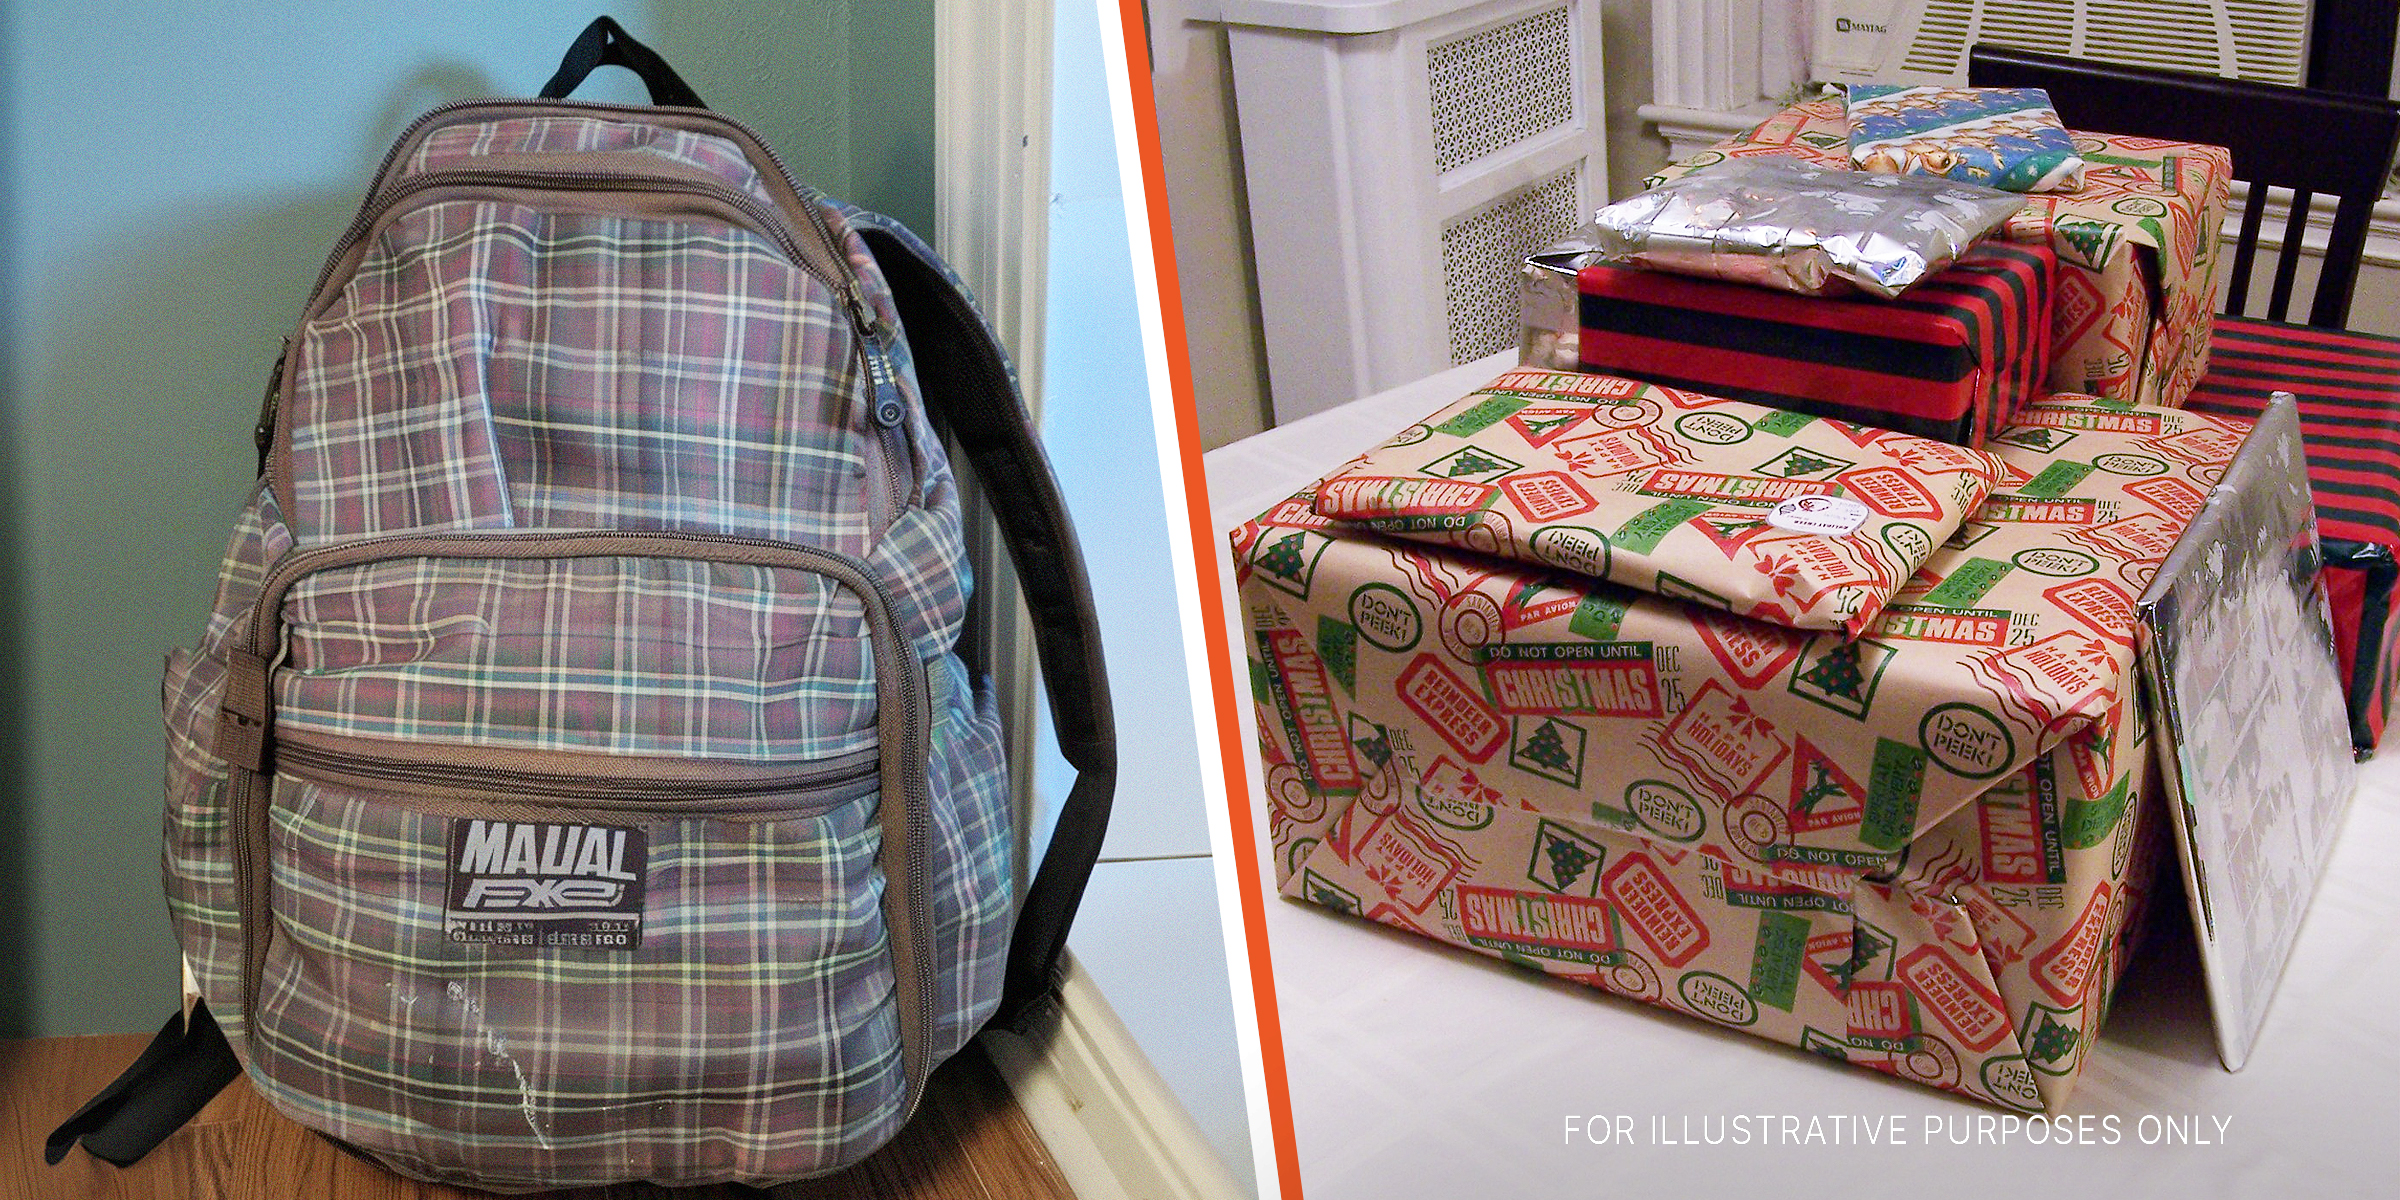 An old backpack and a pile of presents | Source: Midjourney & Flickr